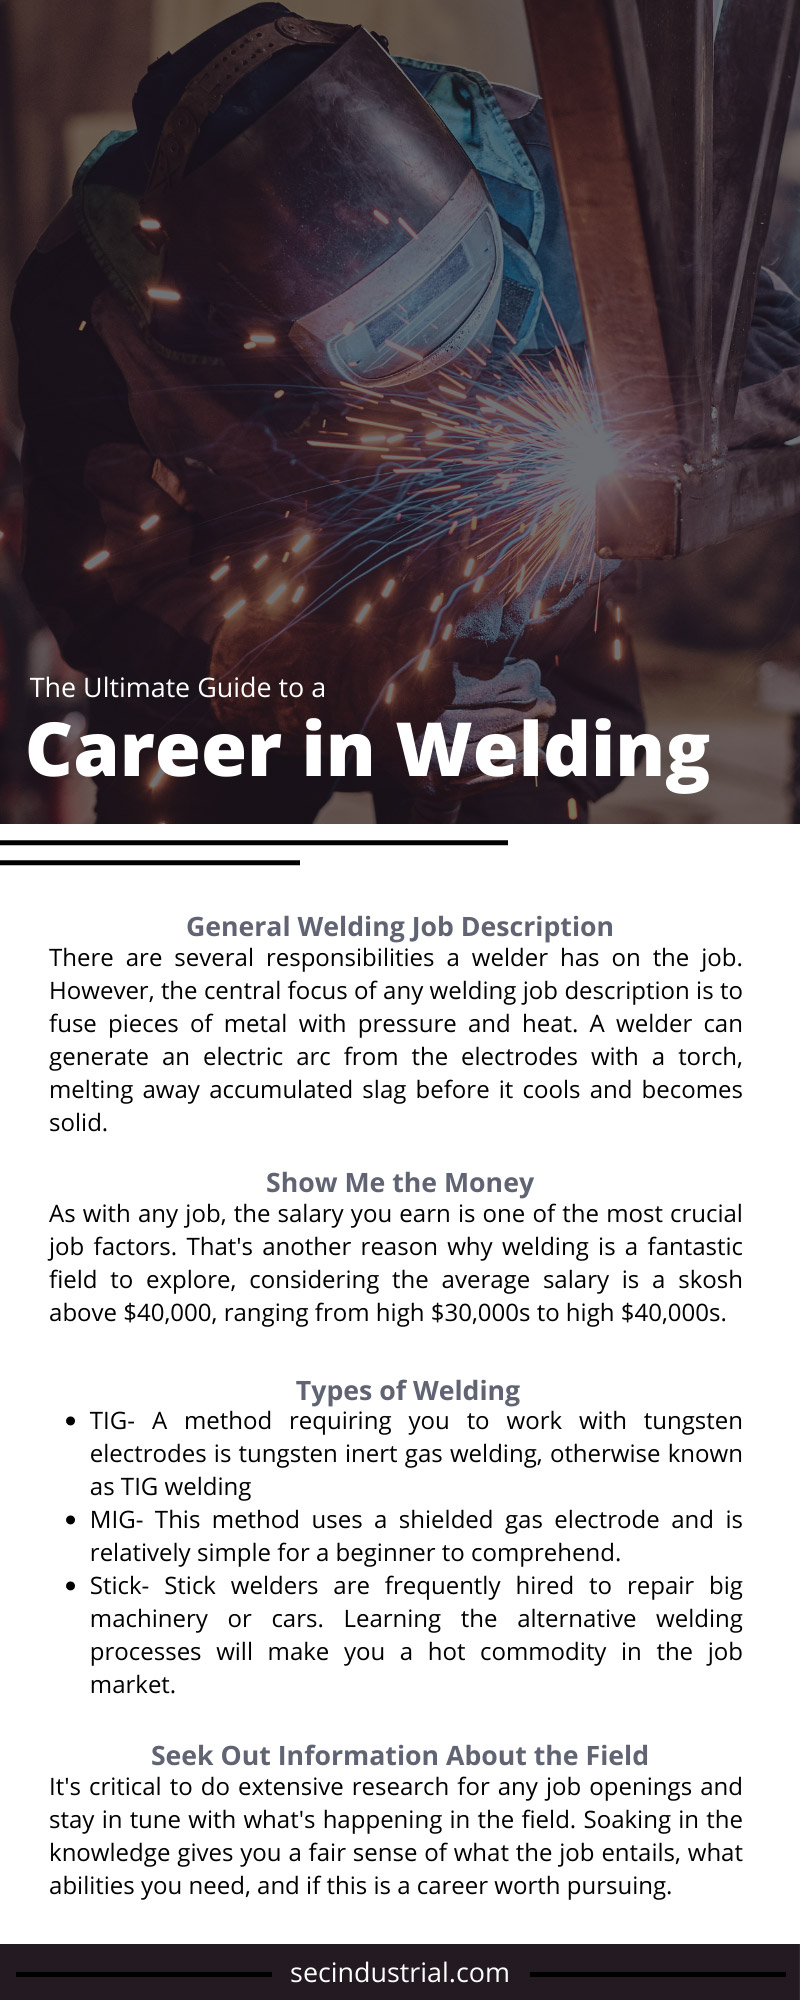 The Ultimate Guide to a Career in Welding